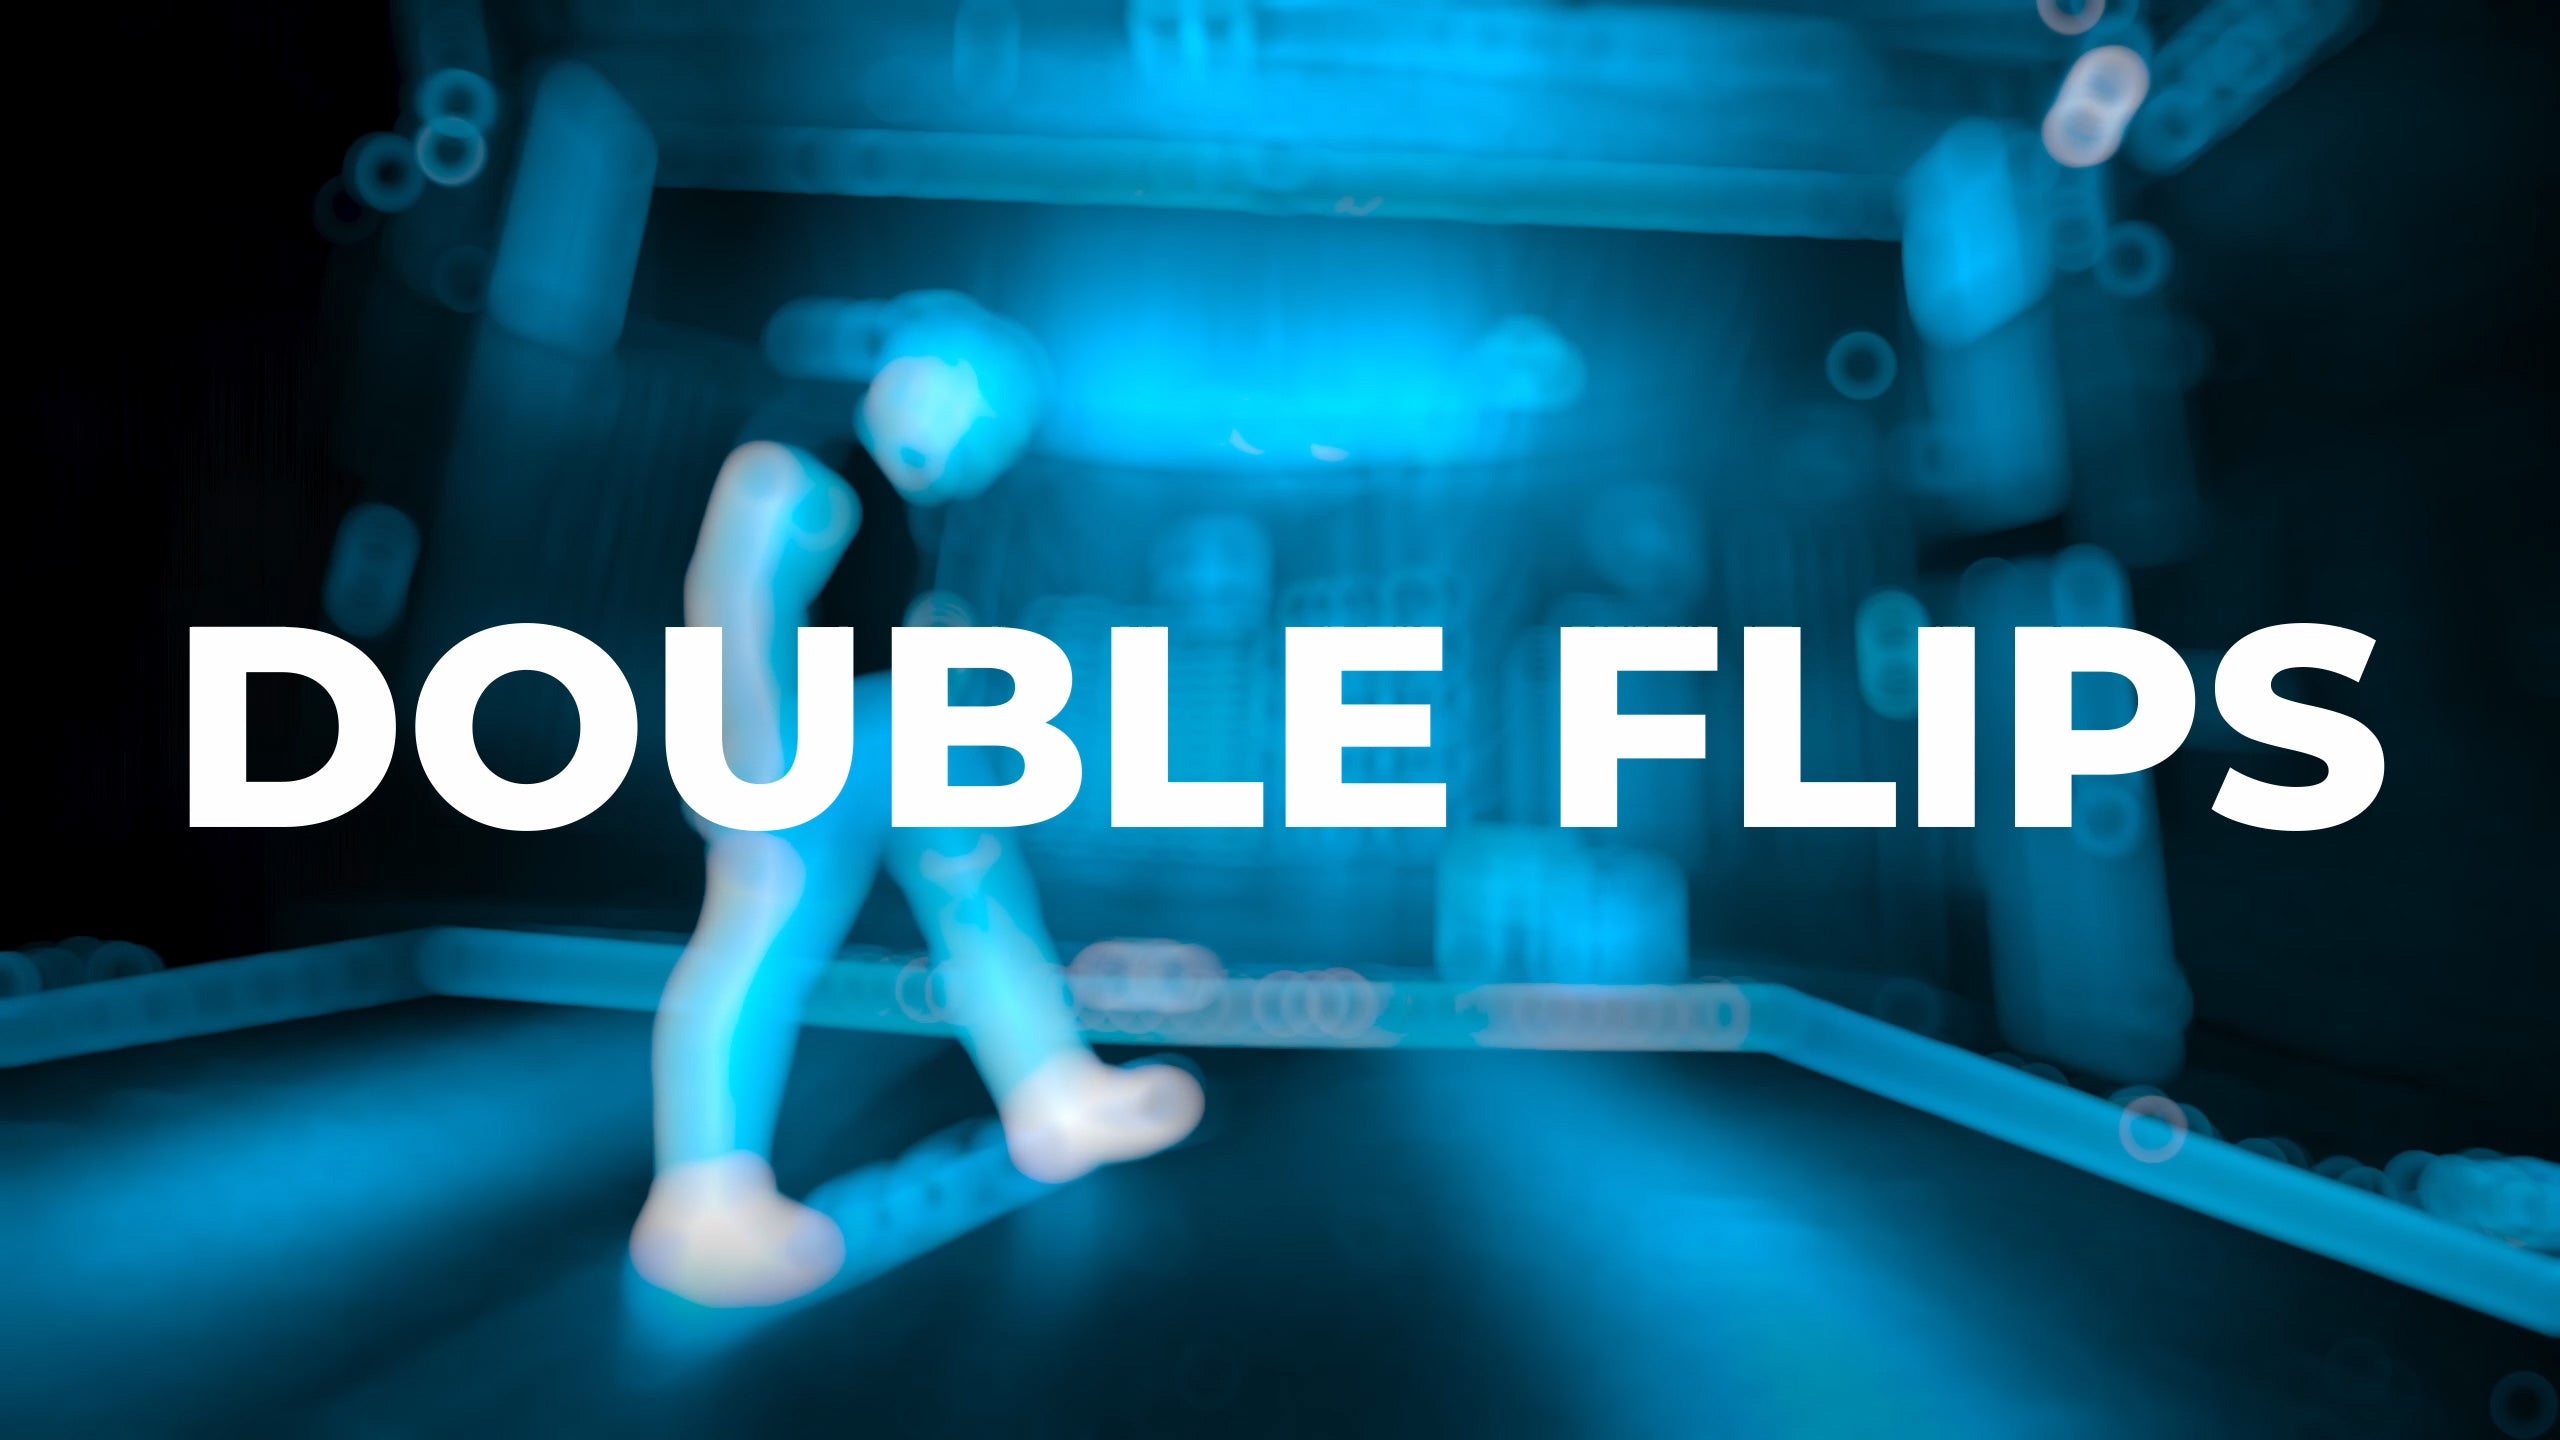 Double flips tutorial - placeholder image